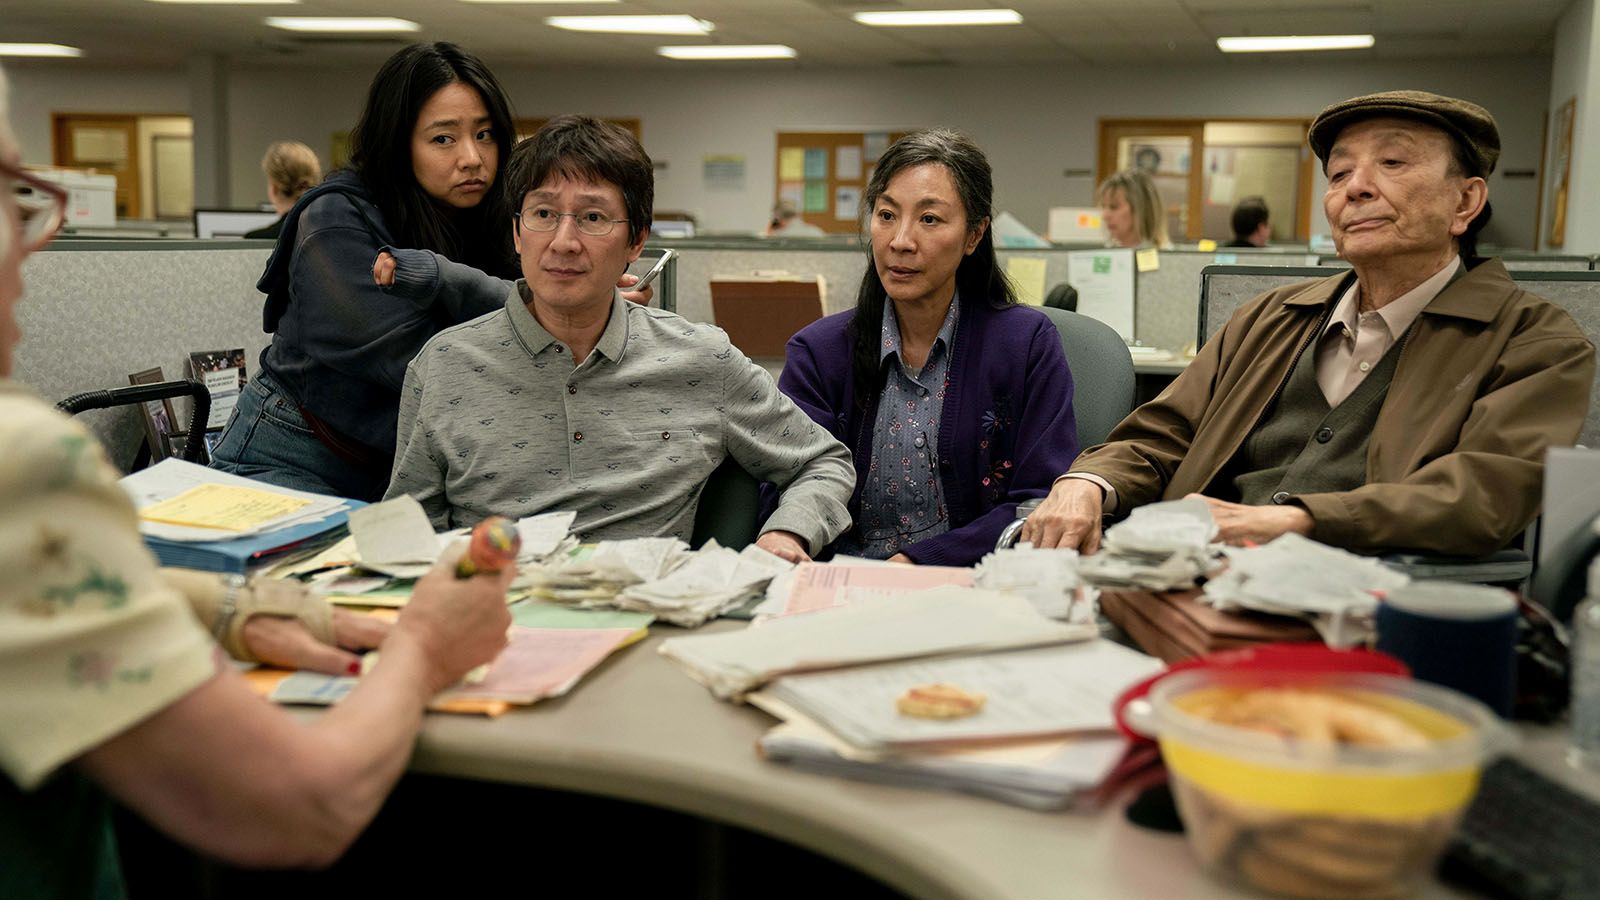 Everything Everywhere All at Once, starring, from left, Stephanie Hsu, Ky Huy Quan, Michelle Yeoh, and James Hong, is nominated for a bevy of Academy Awards, including Best Picture.